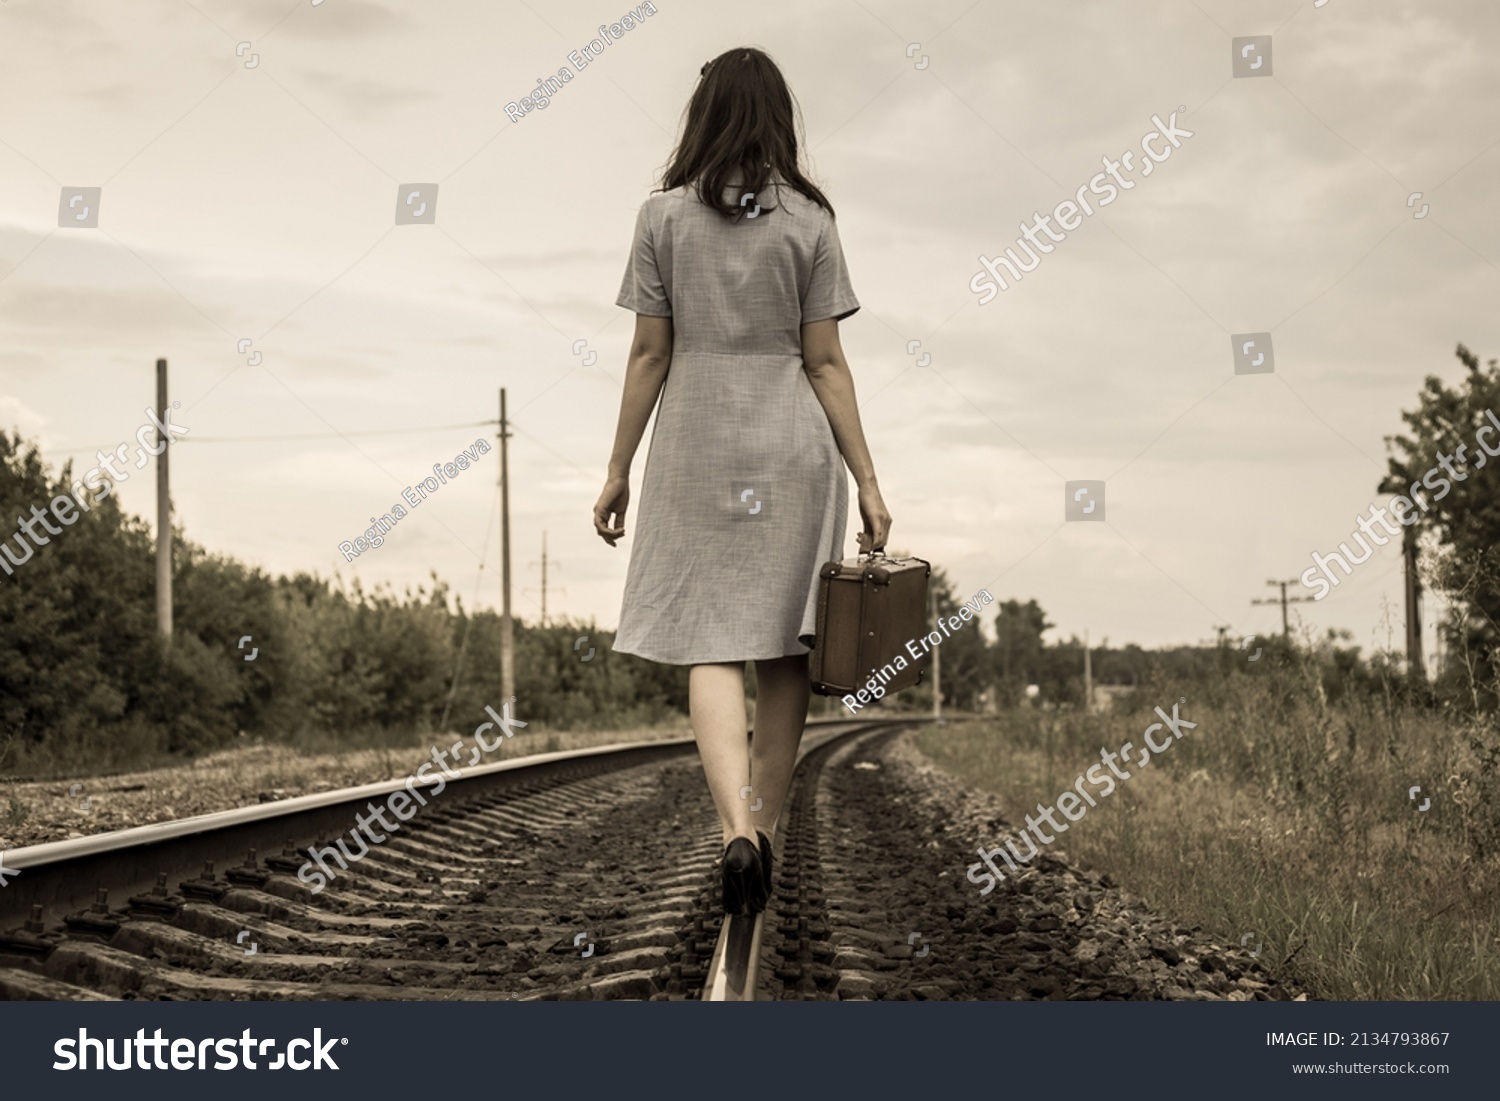 A rear view of a young woman in a dress and with a suitcase walking away along the rails of a railway road. The concept of departure, emigration, departure from the country, refugee status,deportation #2134793867